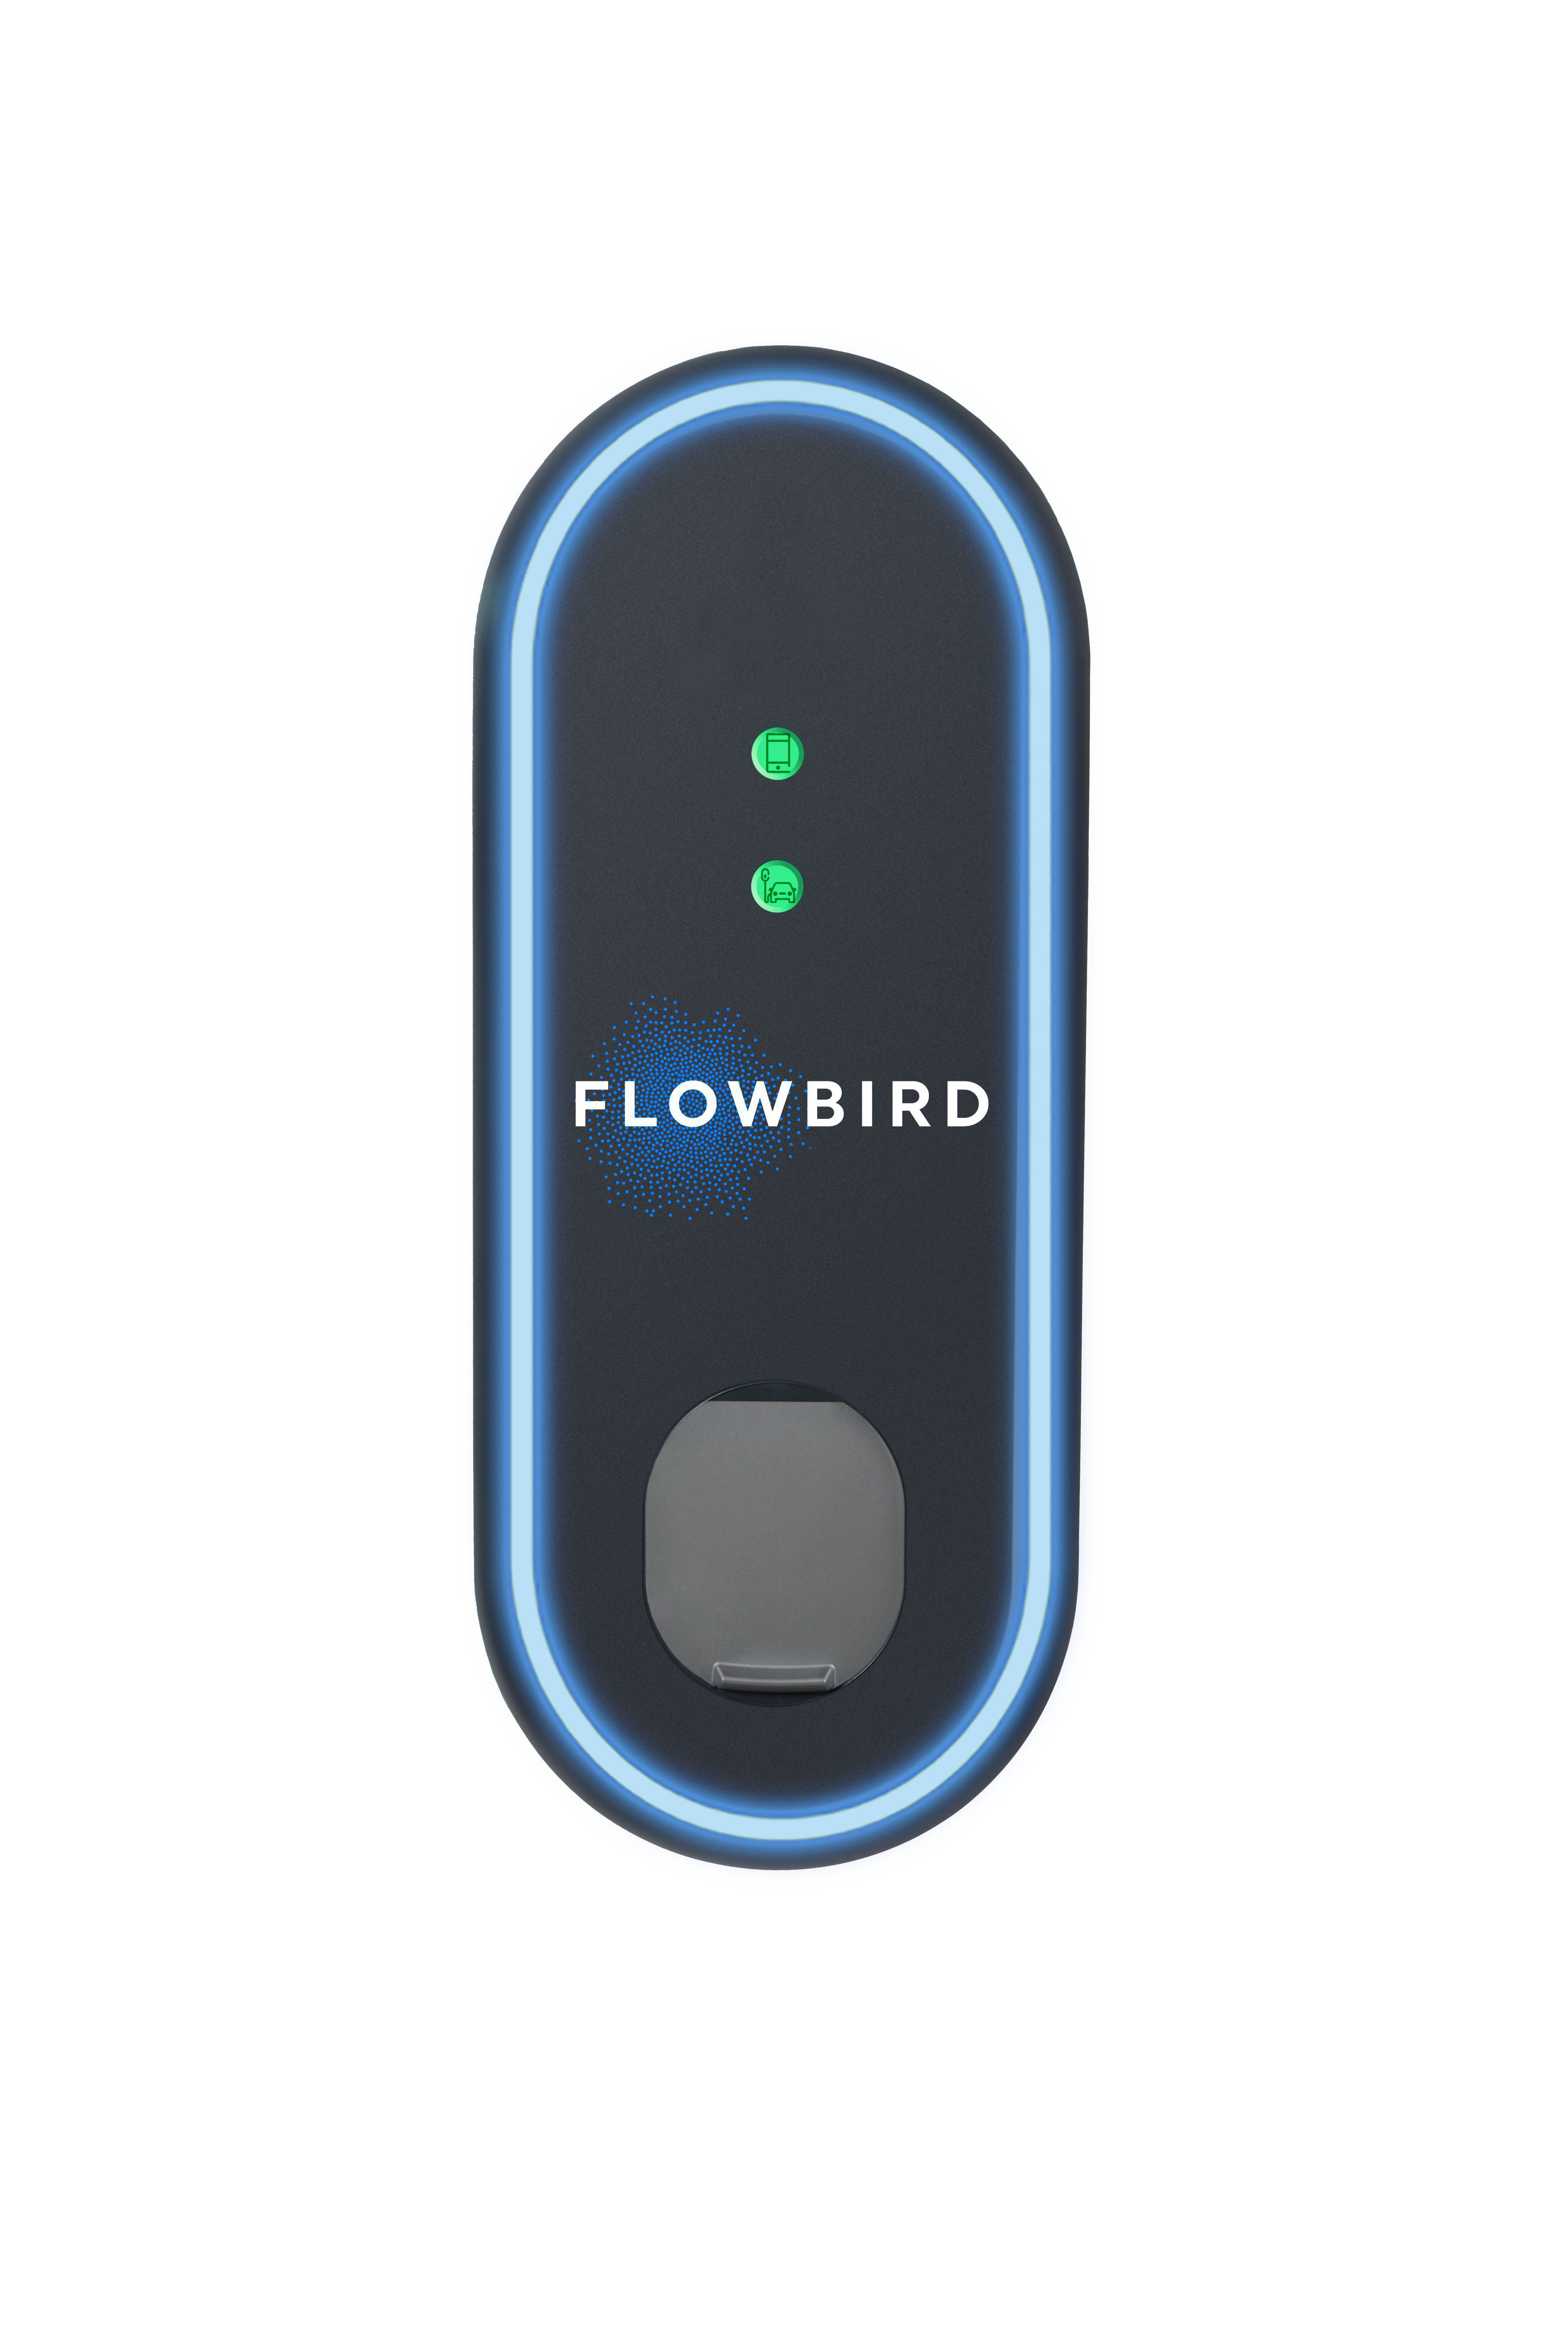 Flowbird's Park & Charge solution helps local authorities manage both parking and EV charging revenues.